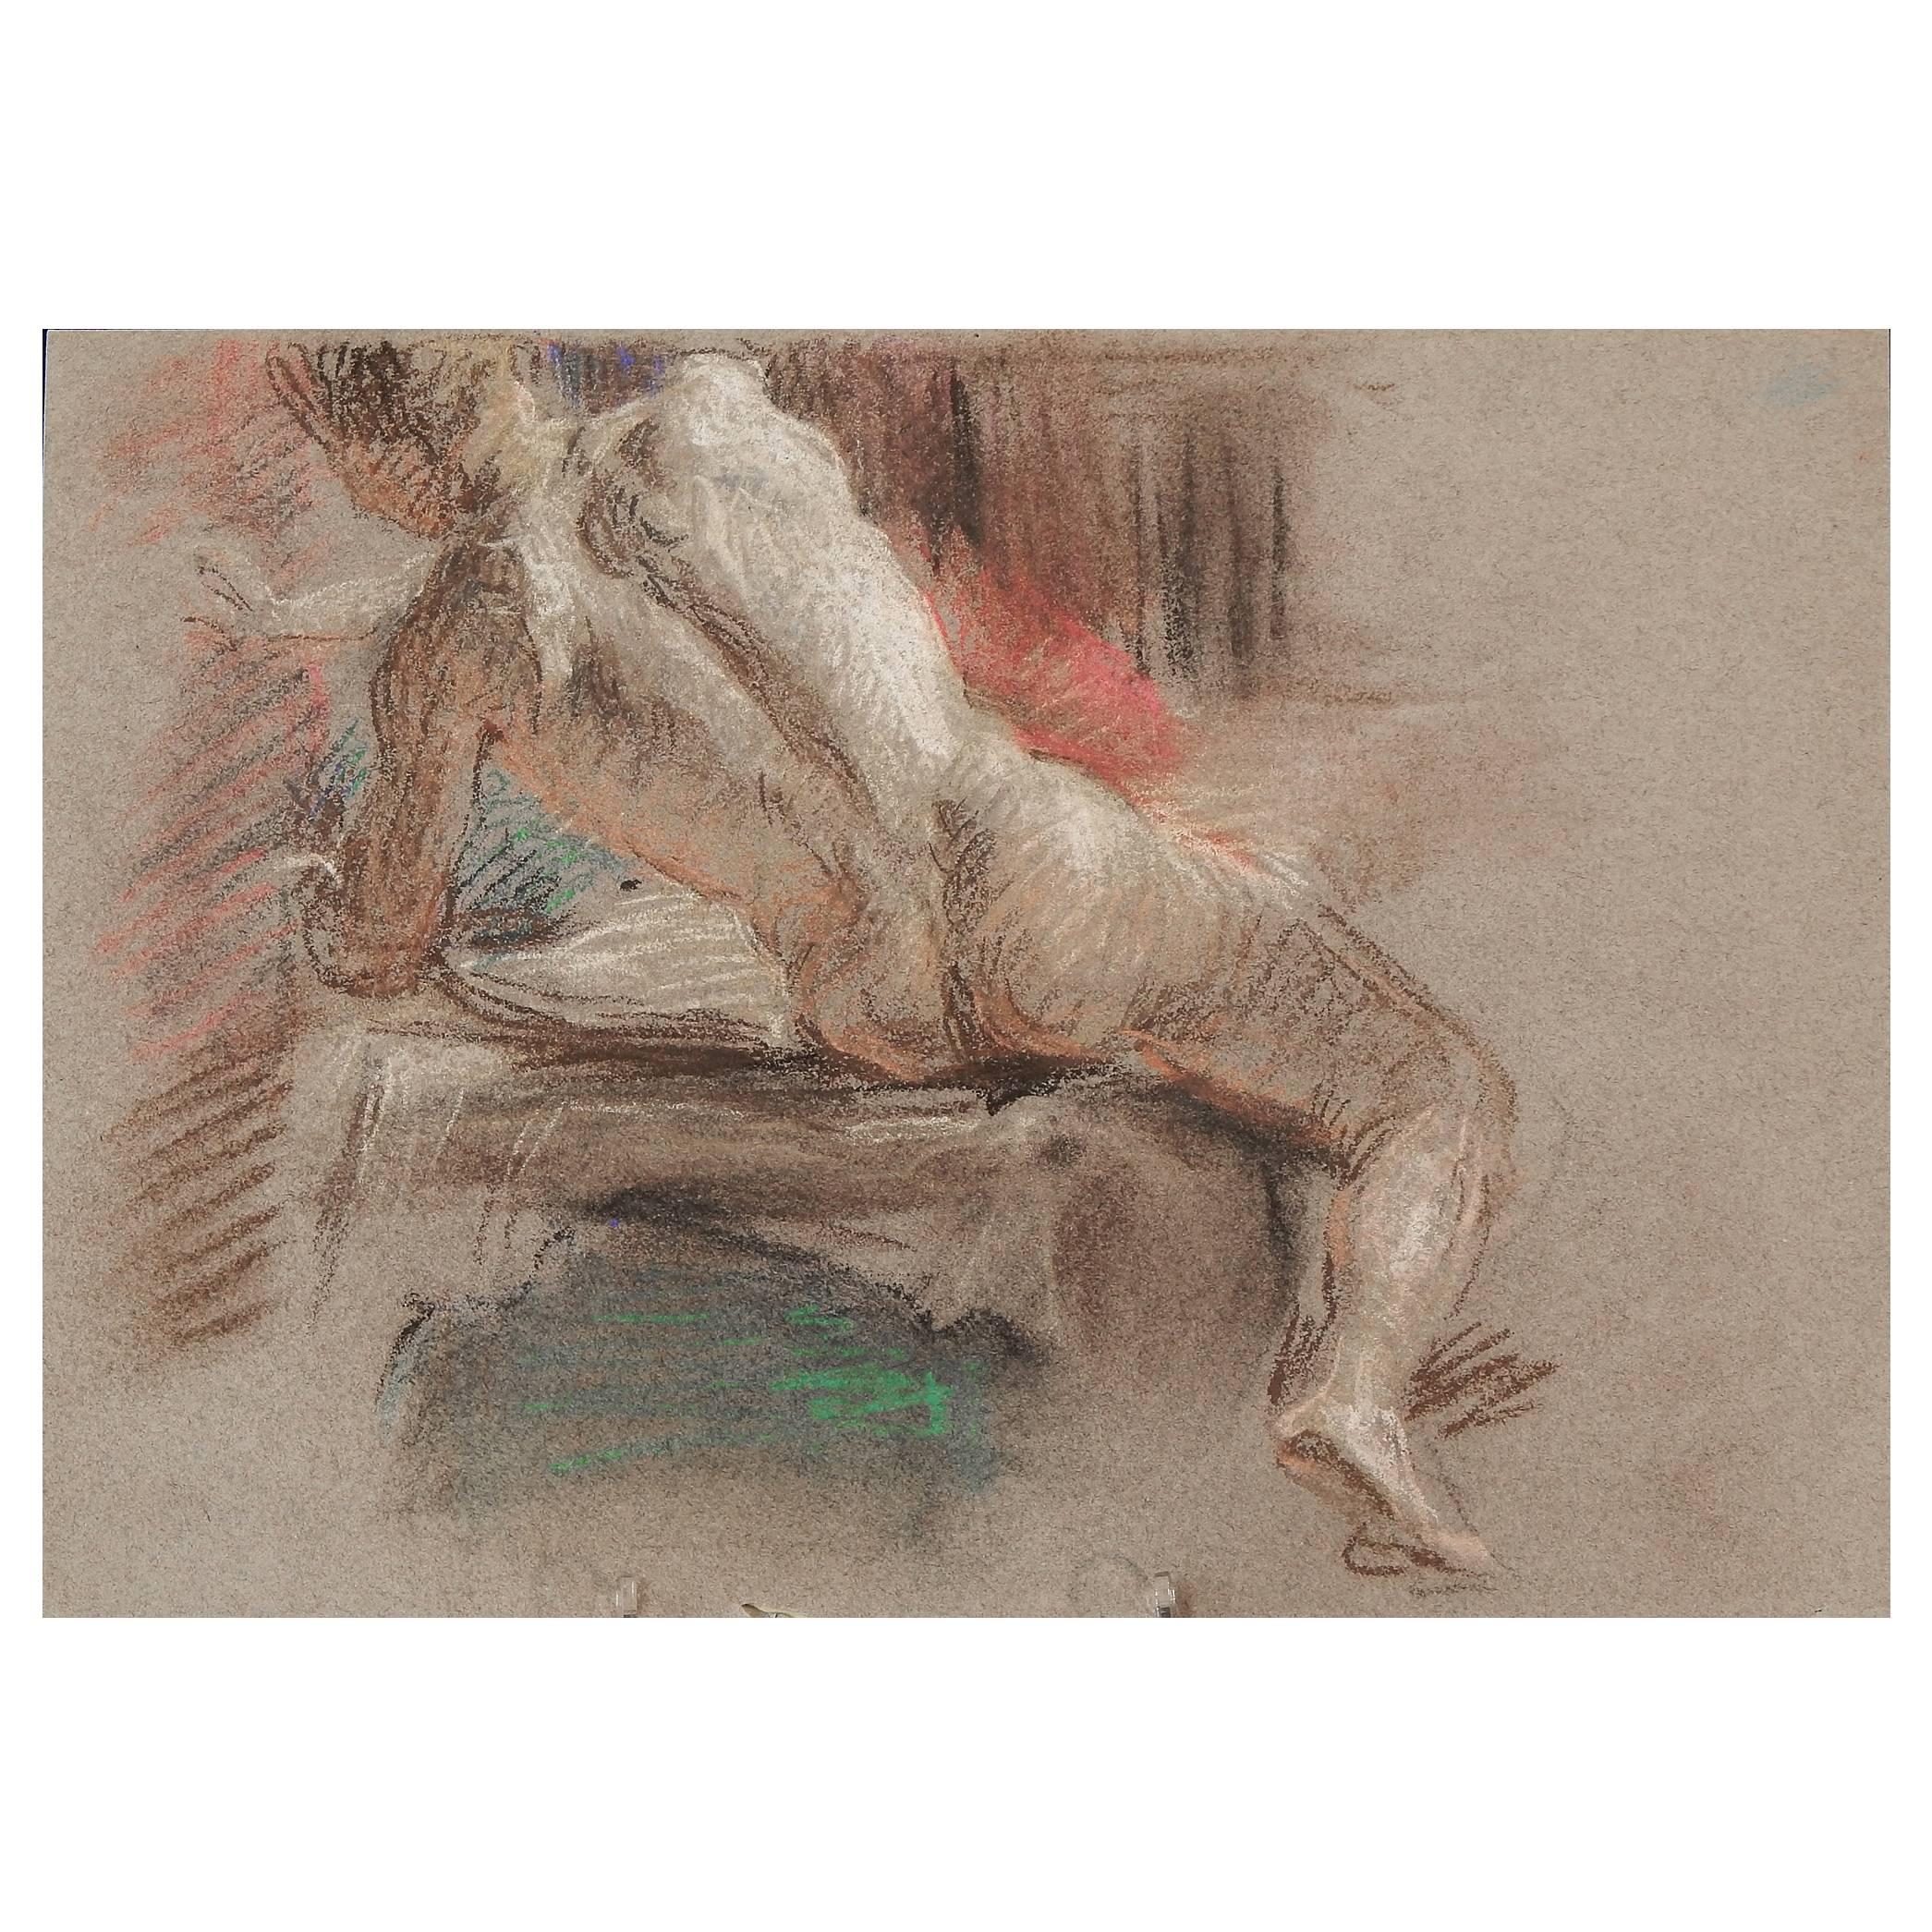 "Seated Male Nude, " Superb Drawing by Allyn Cox, US Capitol Muralist